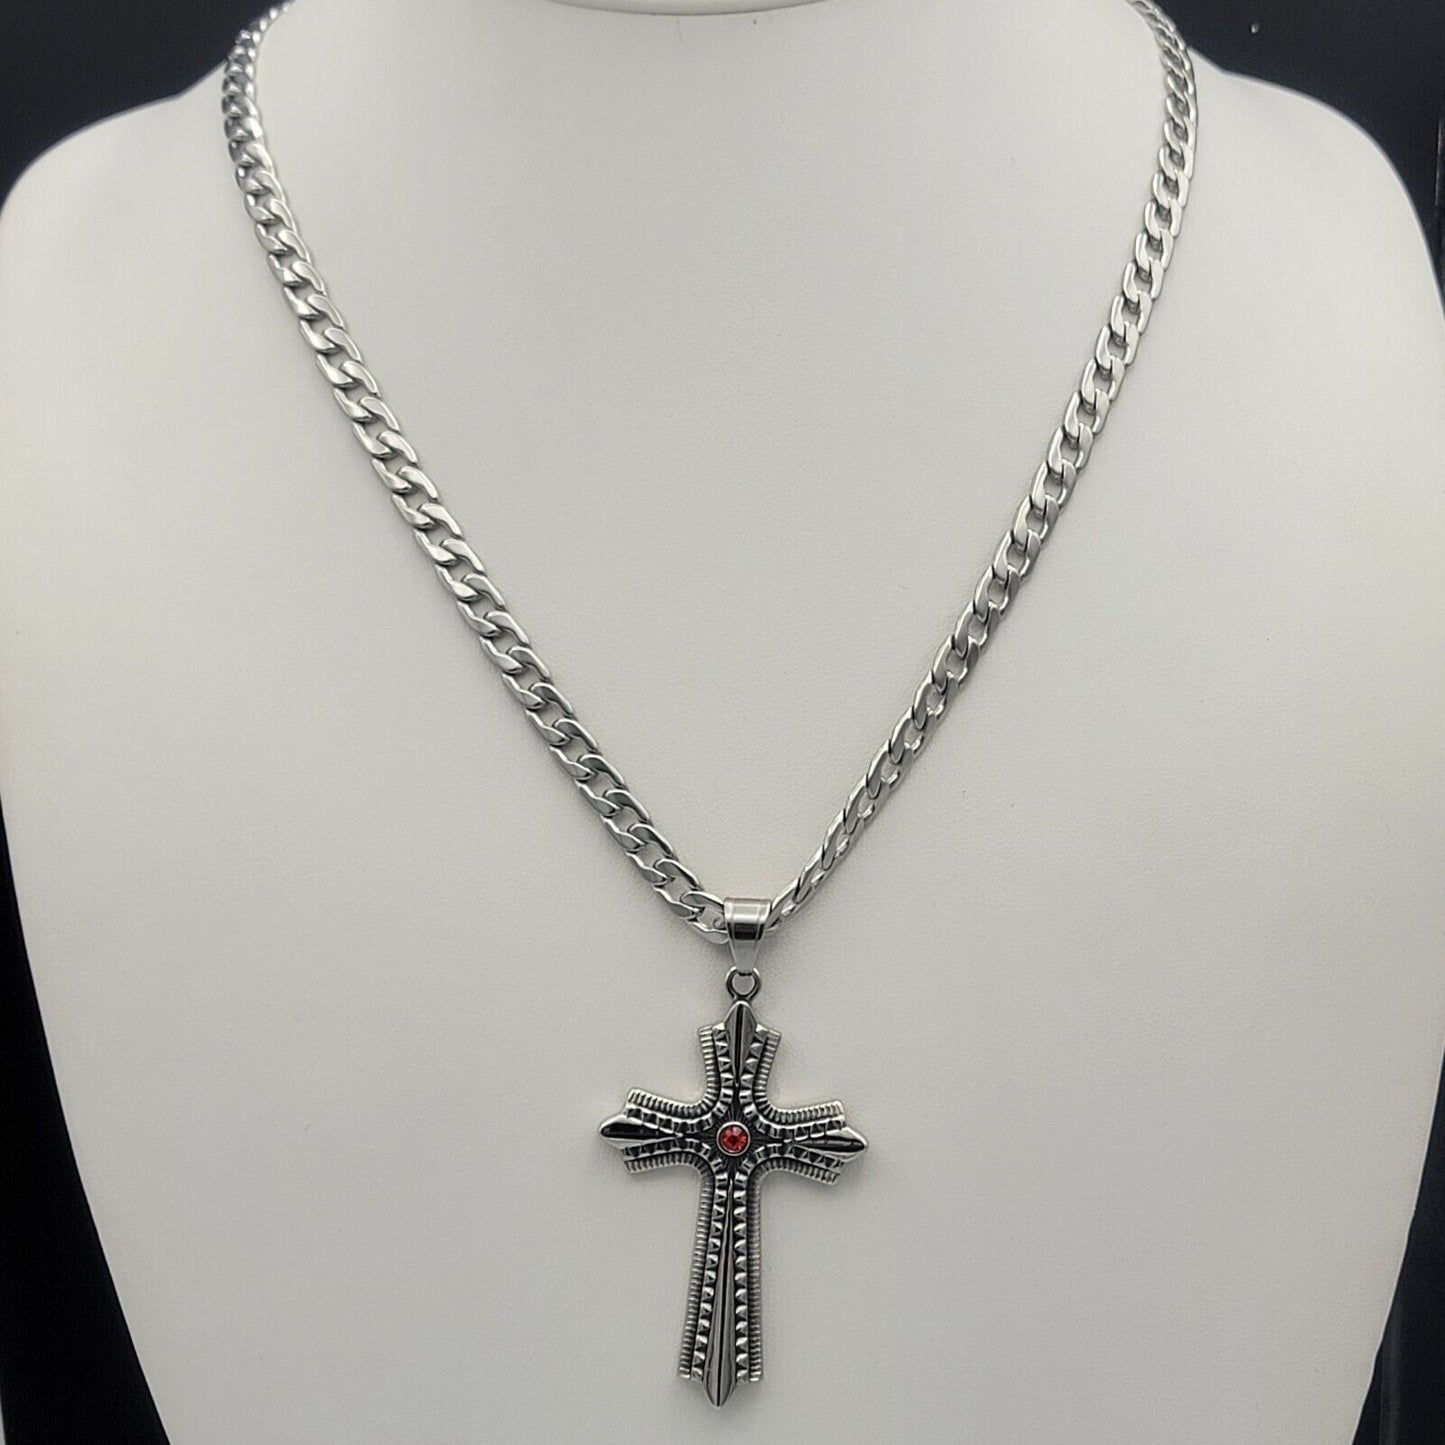 Necklaces - Stainless Steel. Celtic Cross Pendant & Chain. Red Crystal Center.